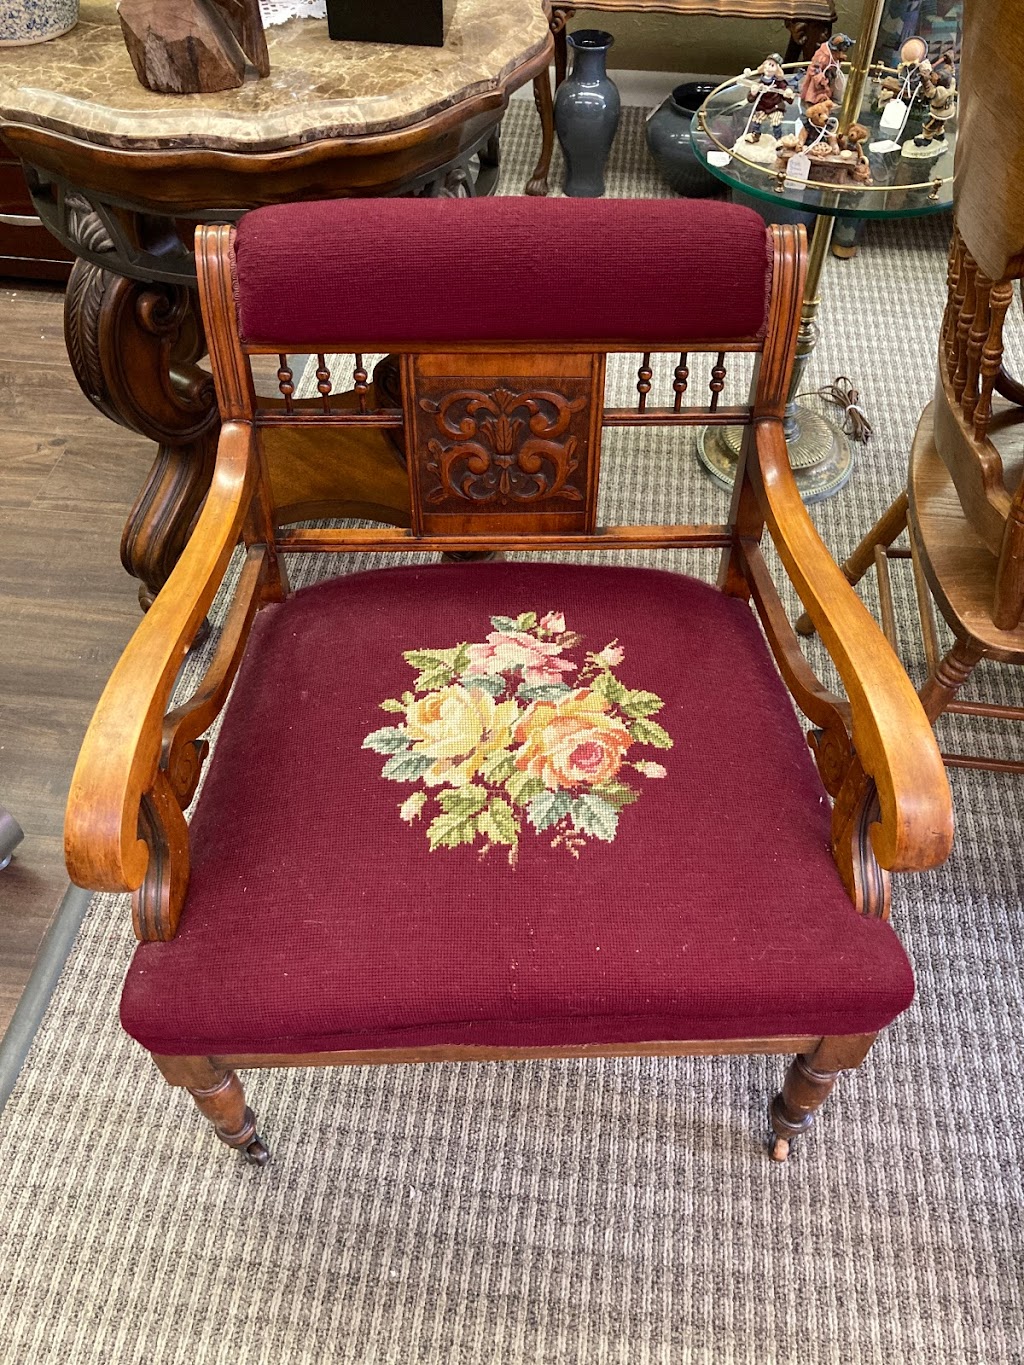 River City Consignments | 2229 Madison St, Bellevue, NE 68005, USA | Phone: (402) 885-8950